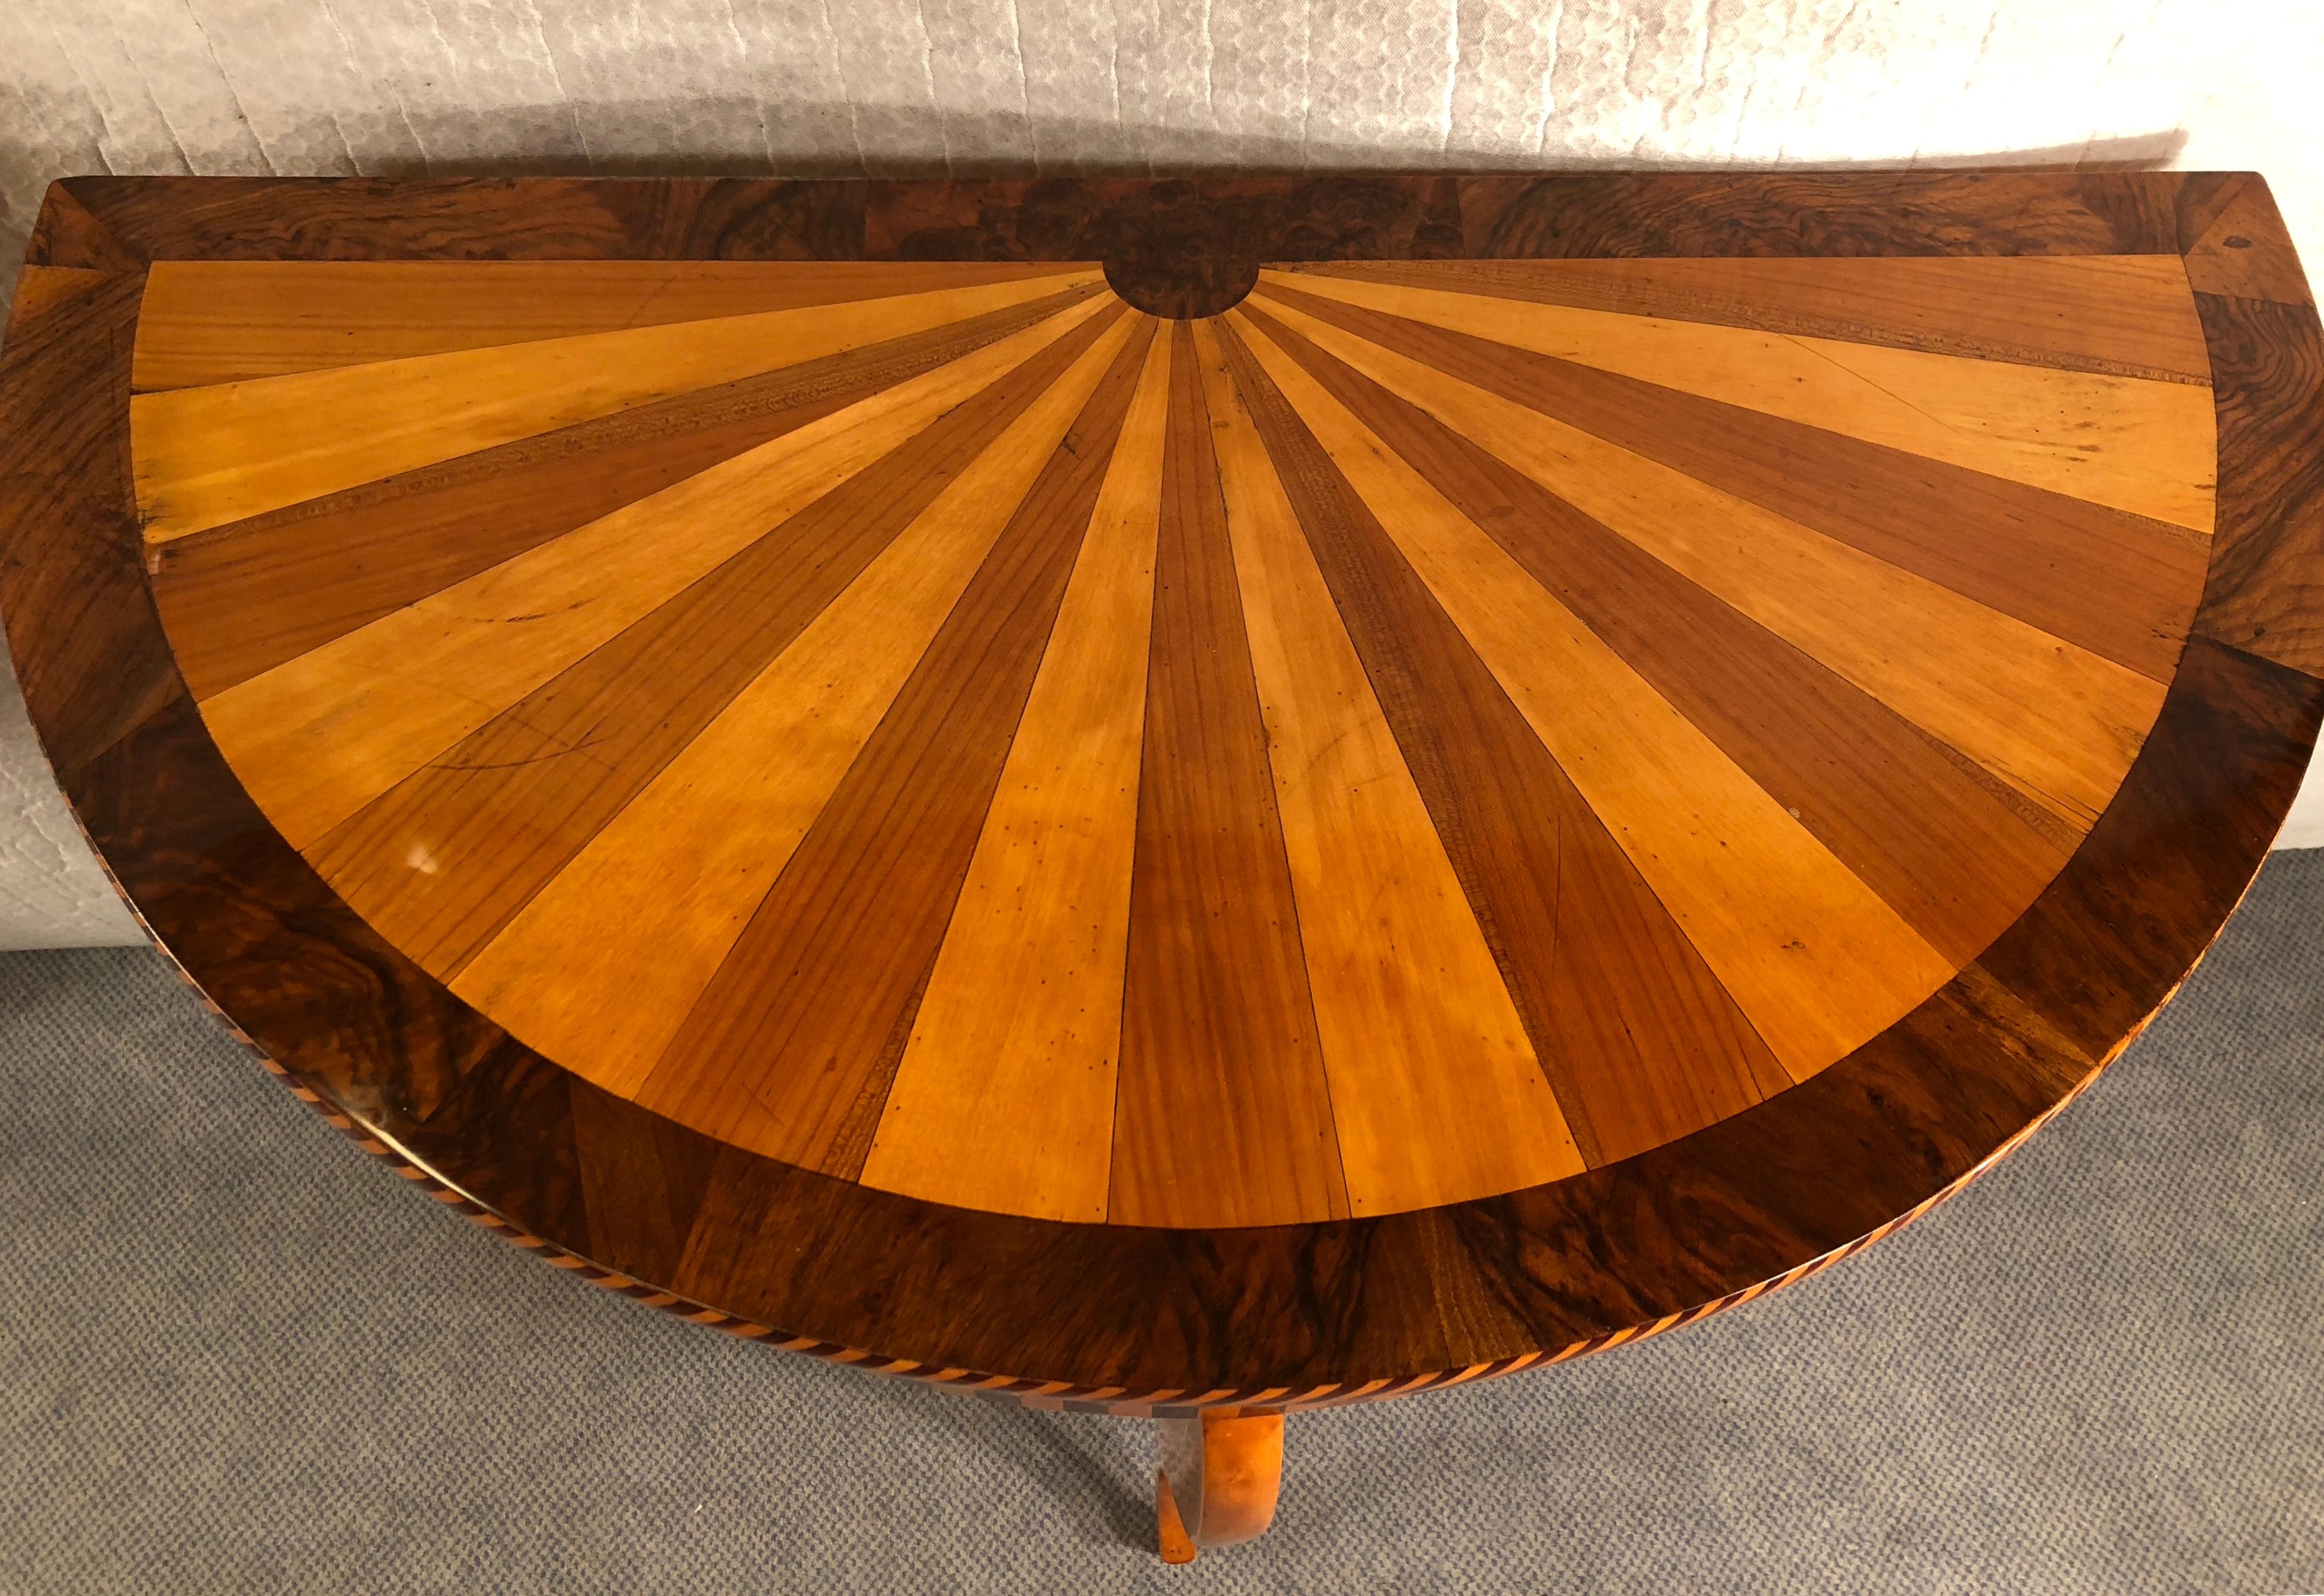 Unique Art Deco demi-lune table, Germany, circa 1900-20, beautiful marquetry in walnut, cherry, mahogany and elm. In good condition, French polished.